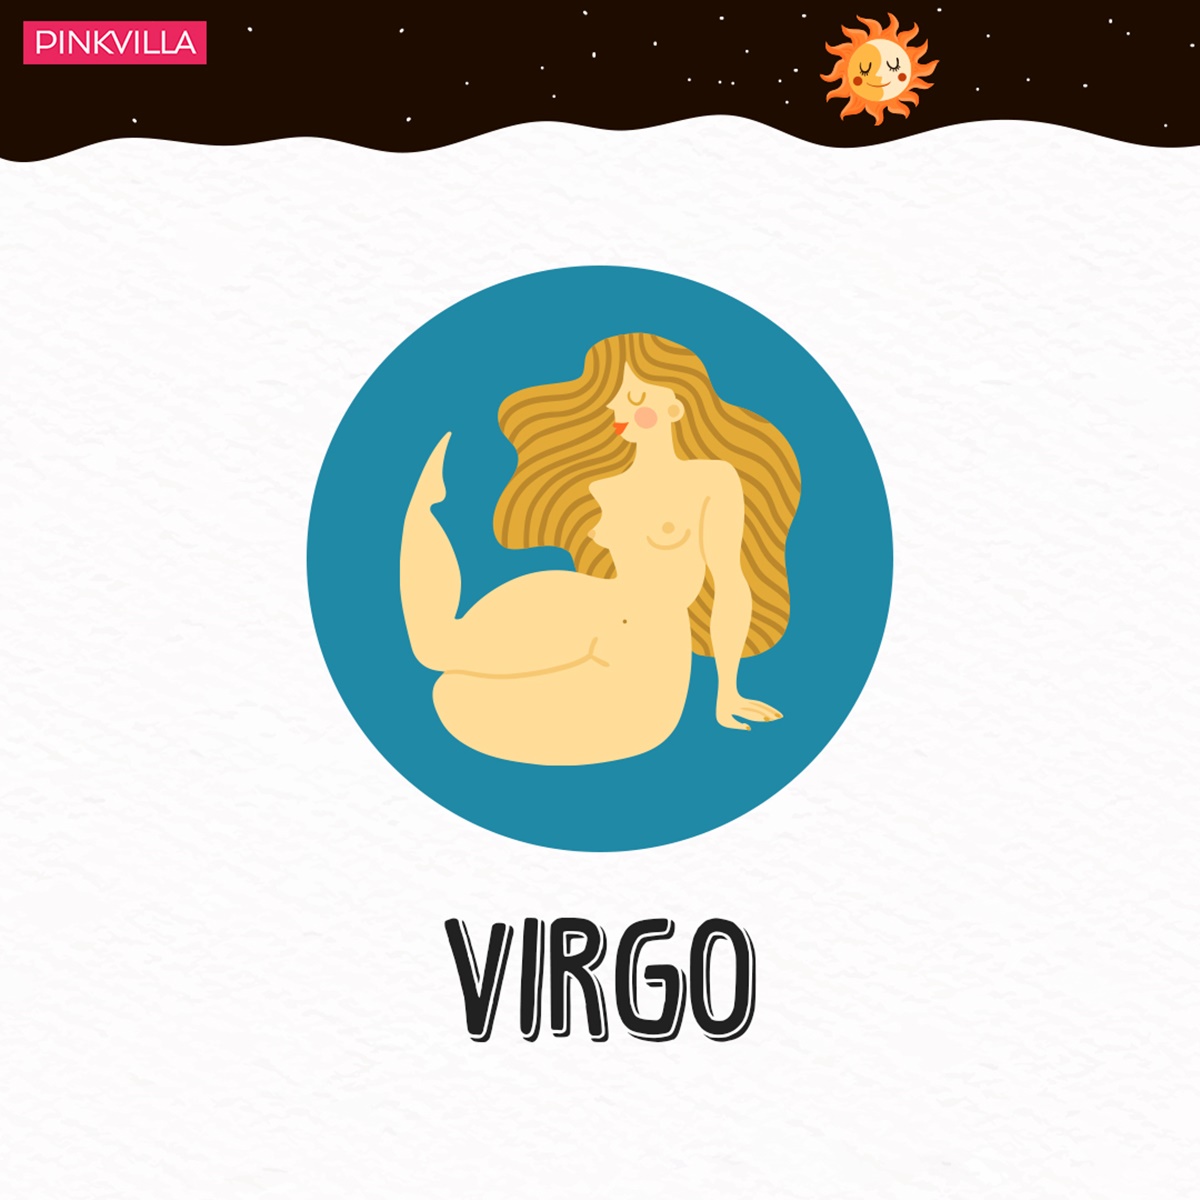 Married zodiac signs who check out gorgeous strangers and have a roving eye